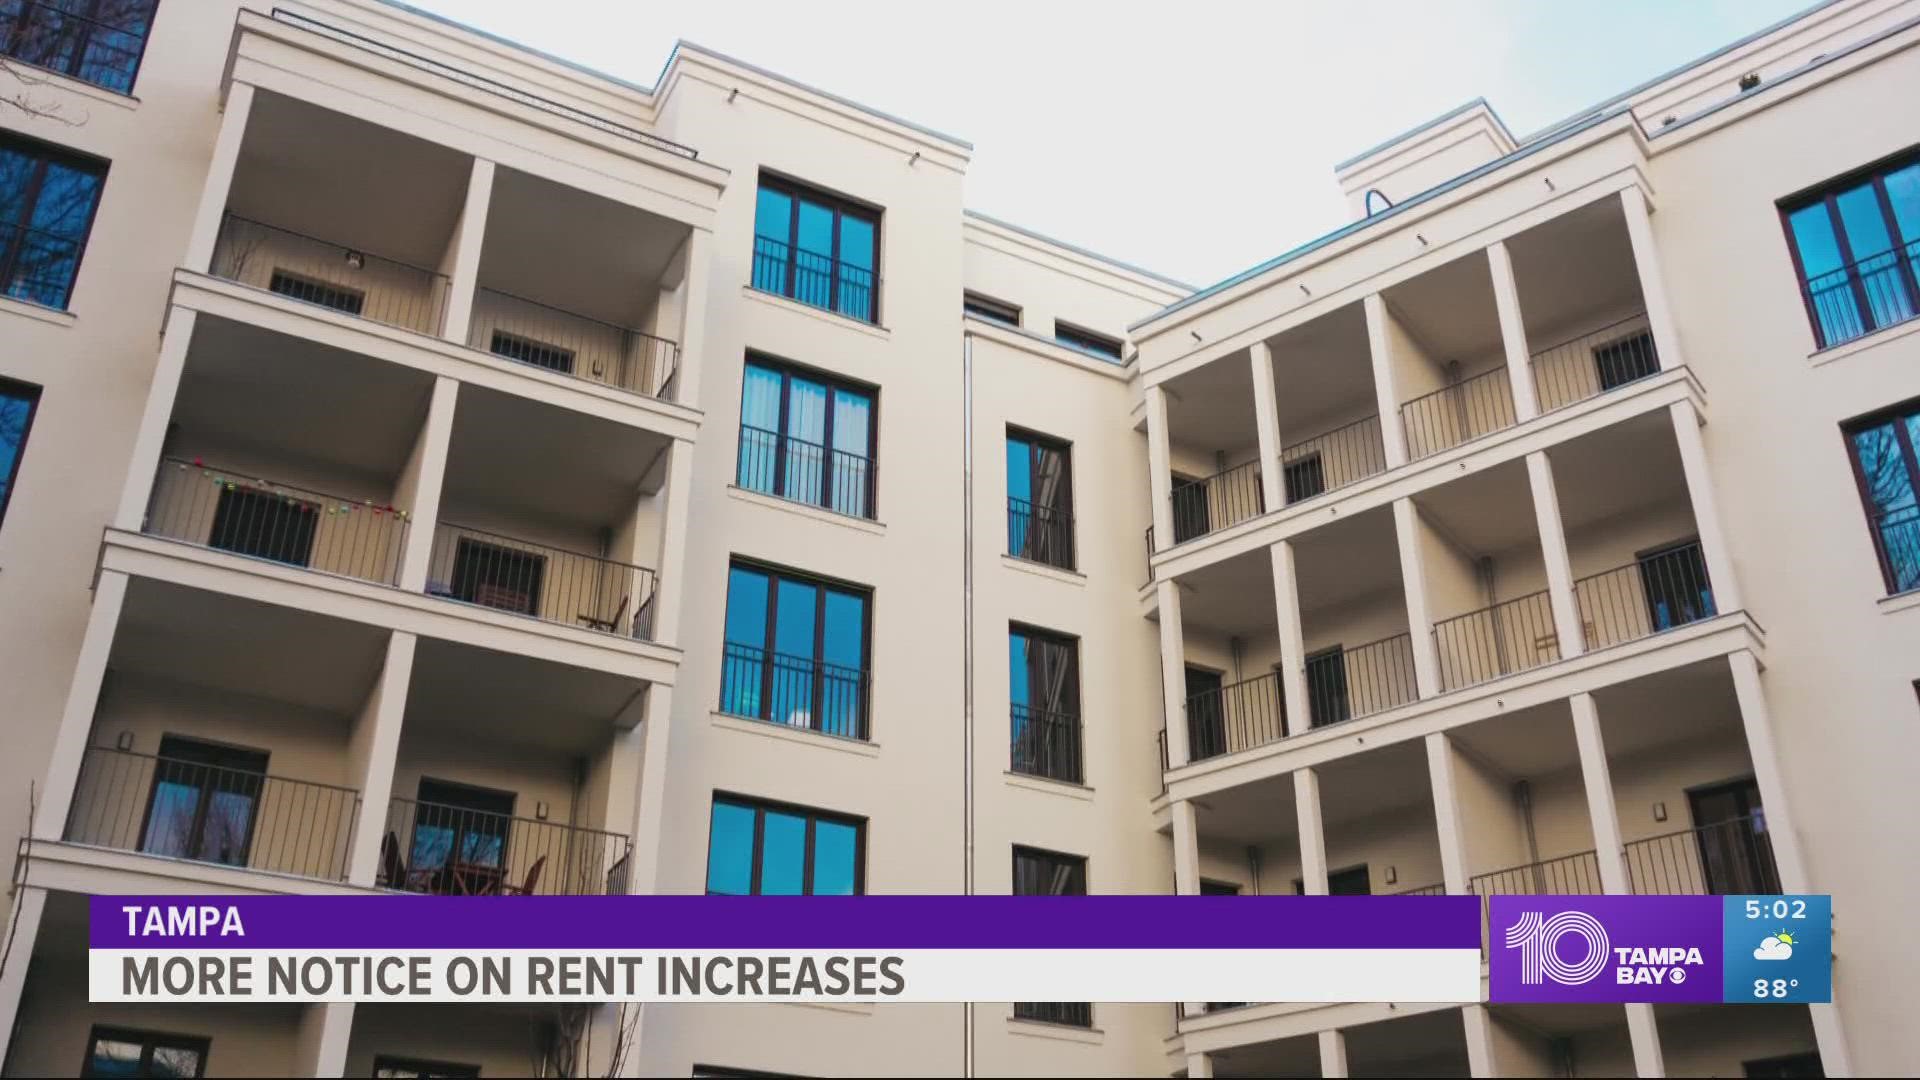 Council members say they hope this helps renters who are struggling as rent prices continue to skyrocket.